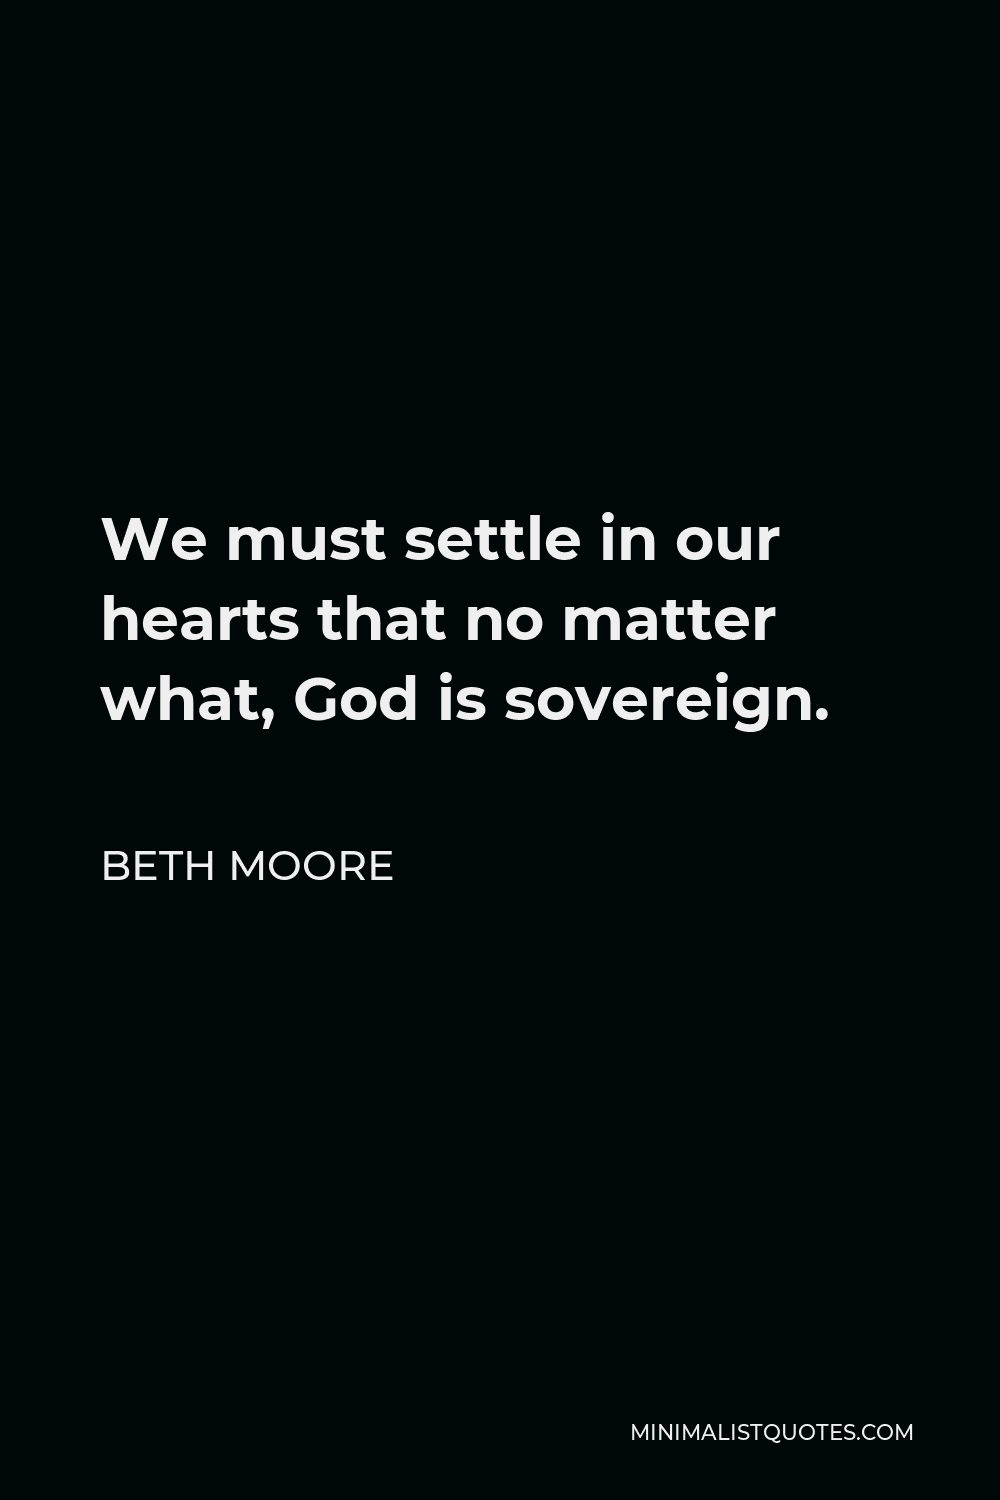 Beth Moore Quote - We must settle in our hearts that no matter what, God is sovereign.